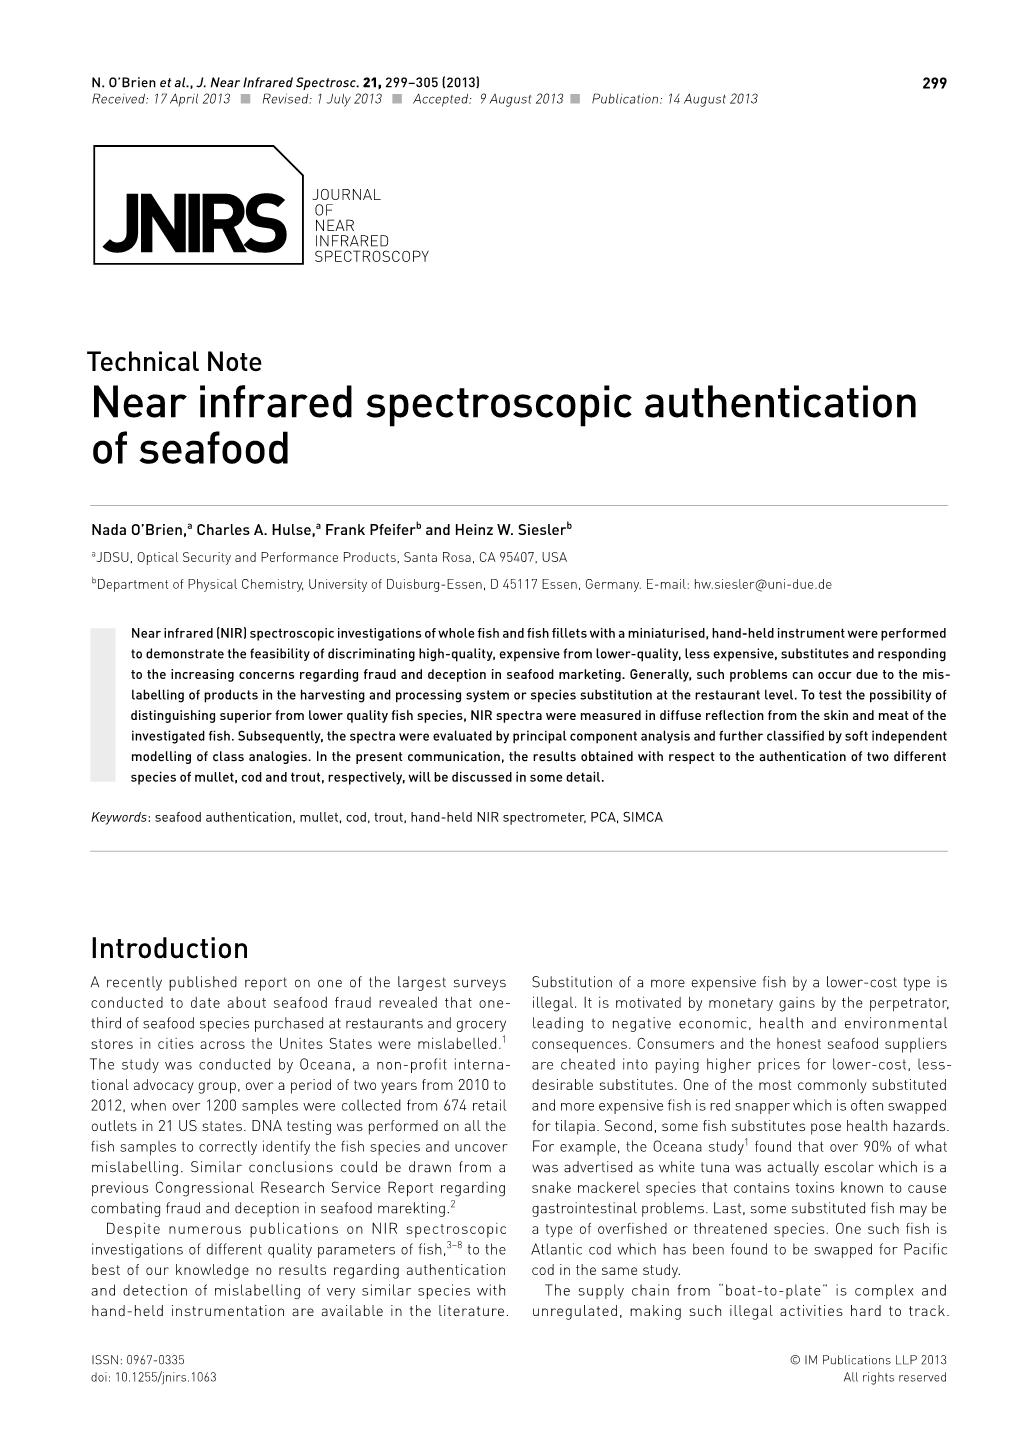 Near Infrared Spectroscopic Authentication of Seafood